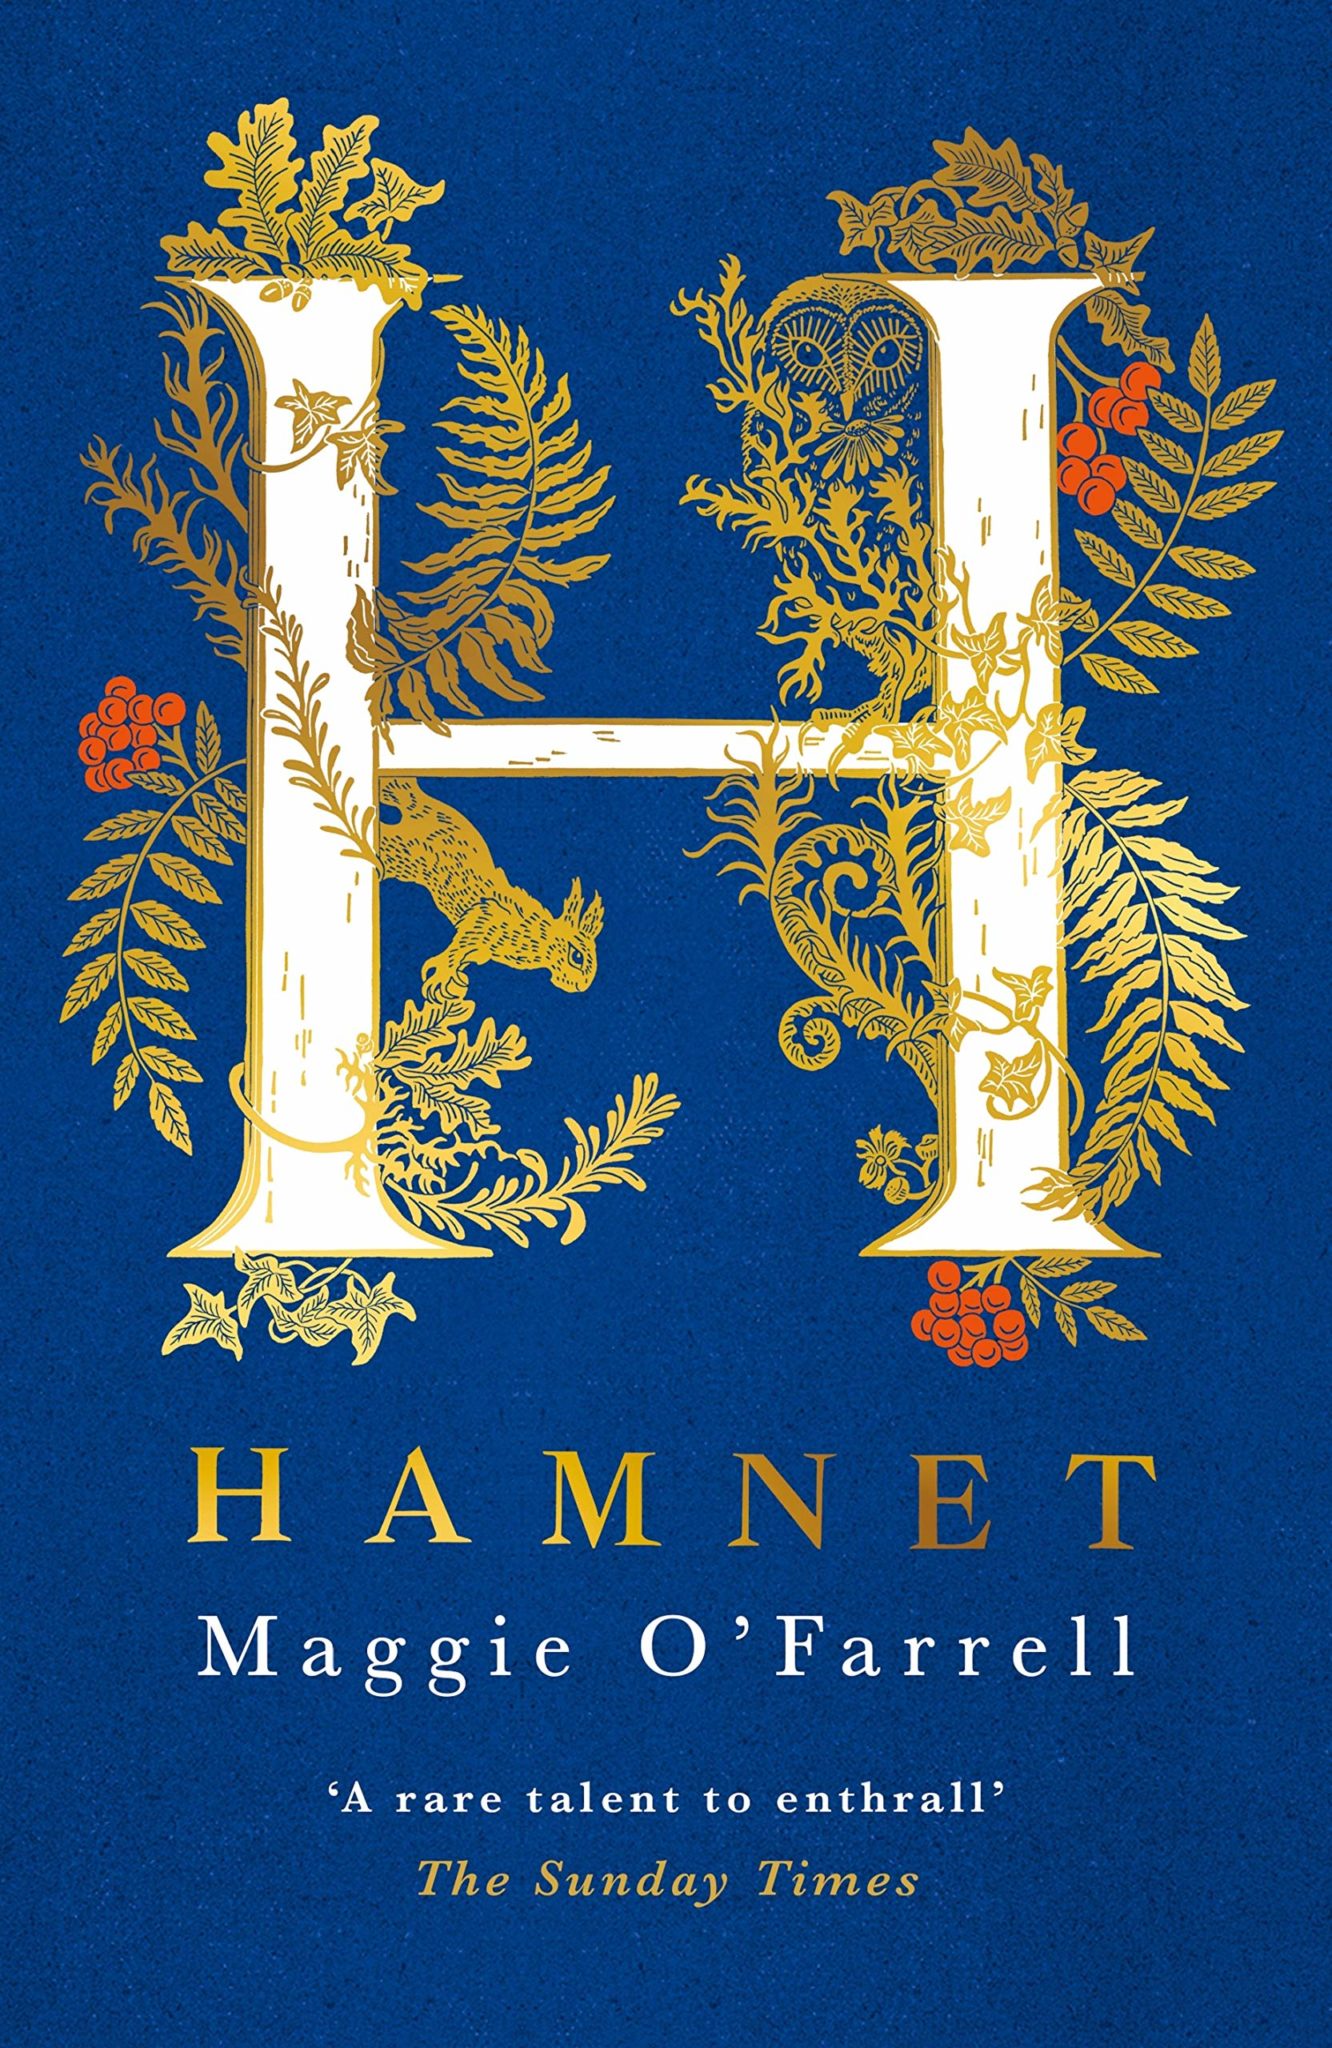 Hamnet by Maggie O'Farrell | 9781472223791. Buy Now at Daunt Books